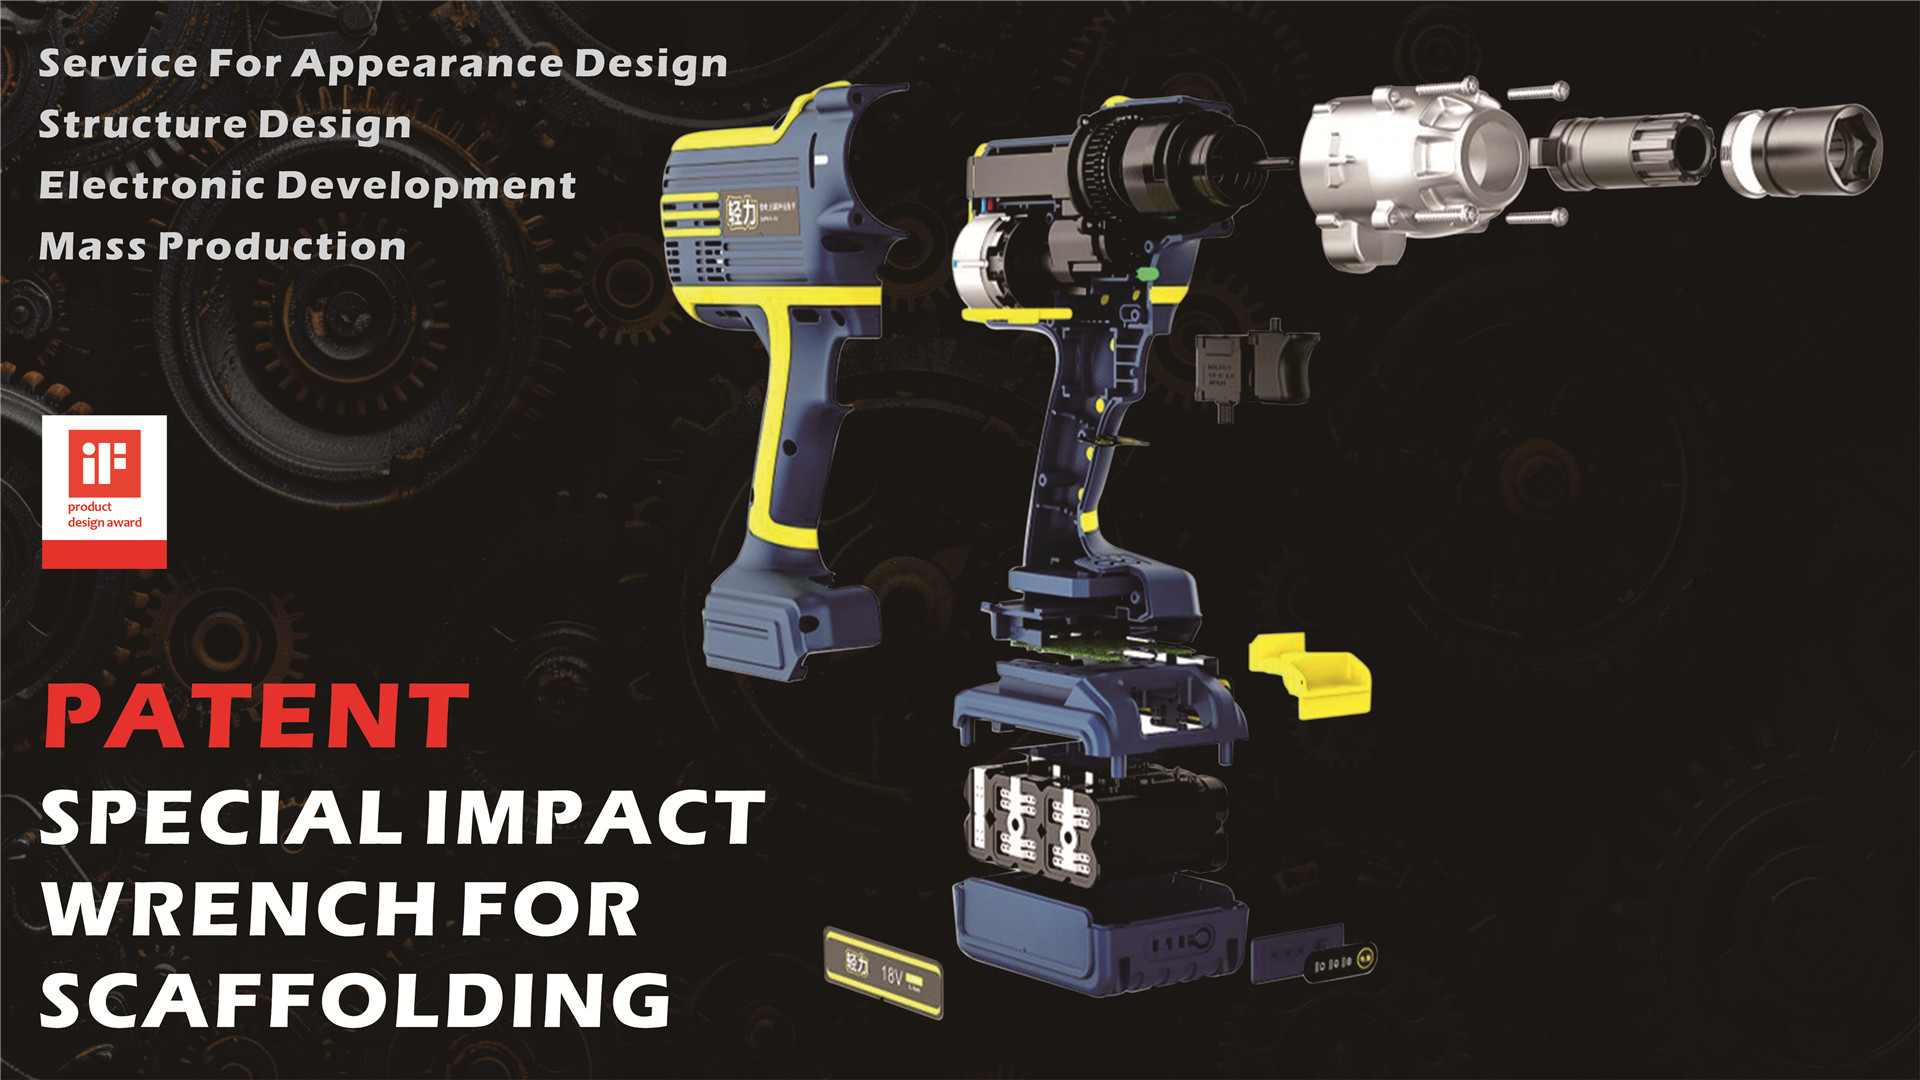 Patent Special Impact Wrench for Scaffolding